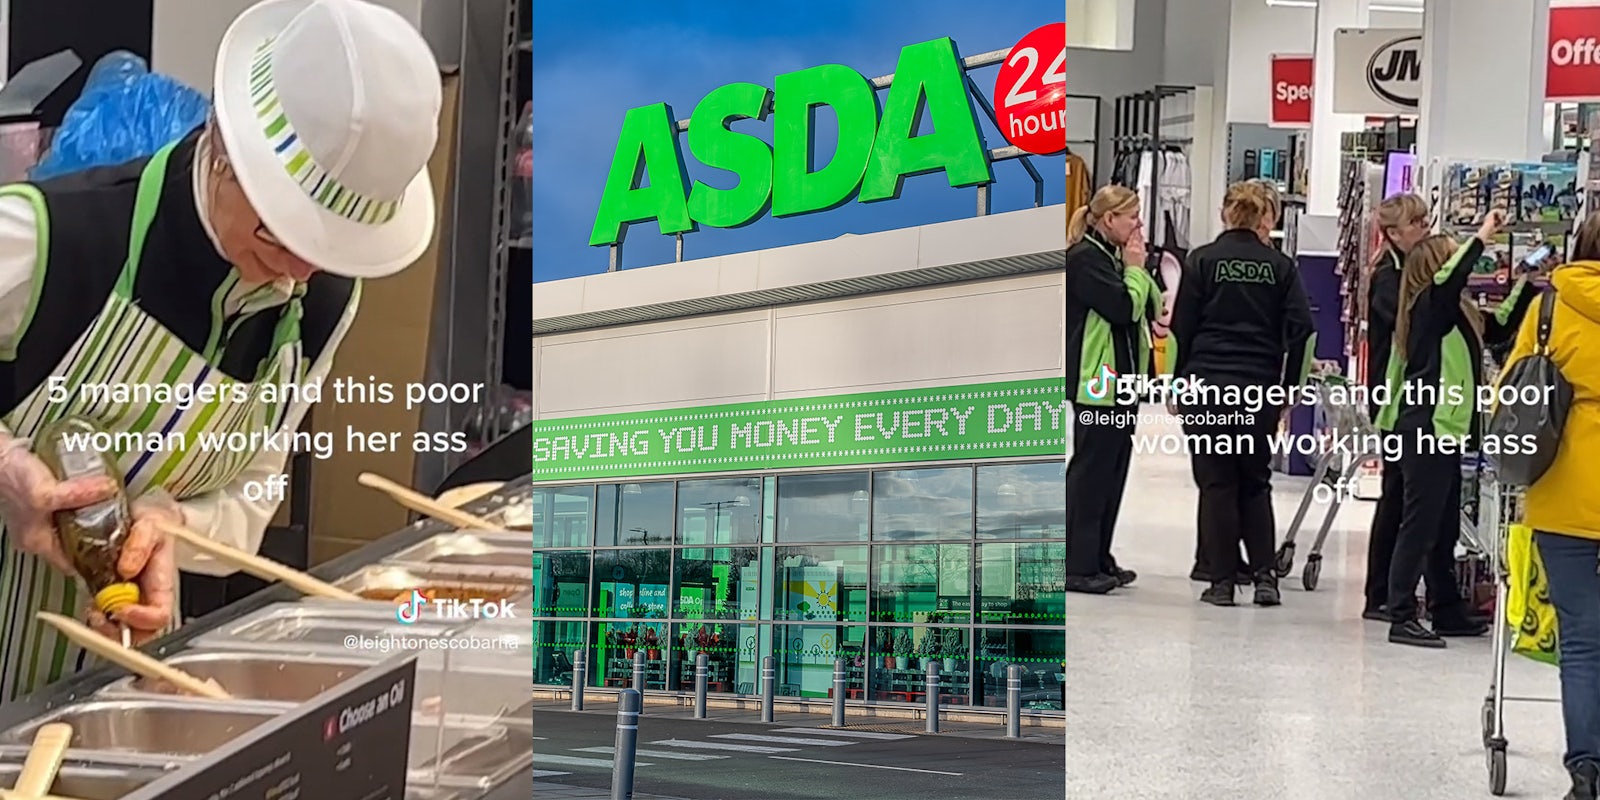 Customer films Asda employee 'working her a** off' while 5 managers stand around